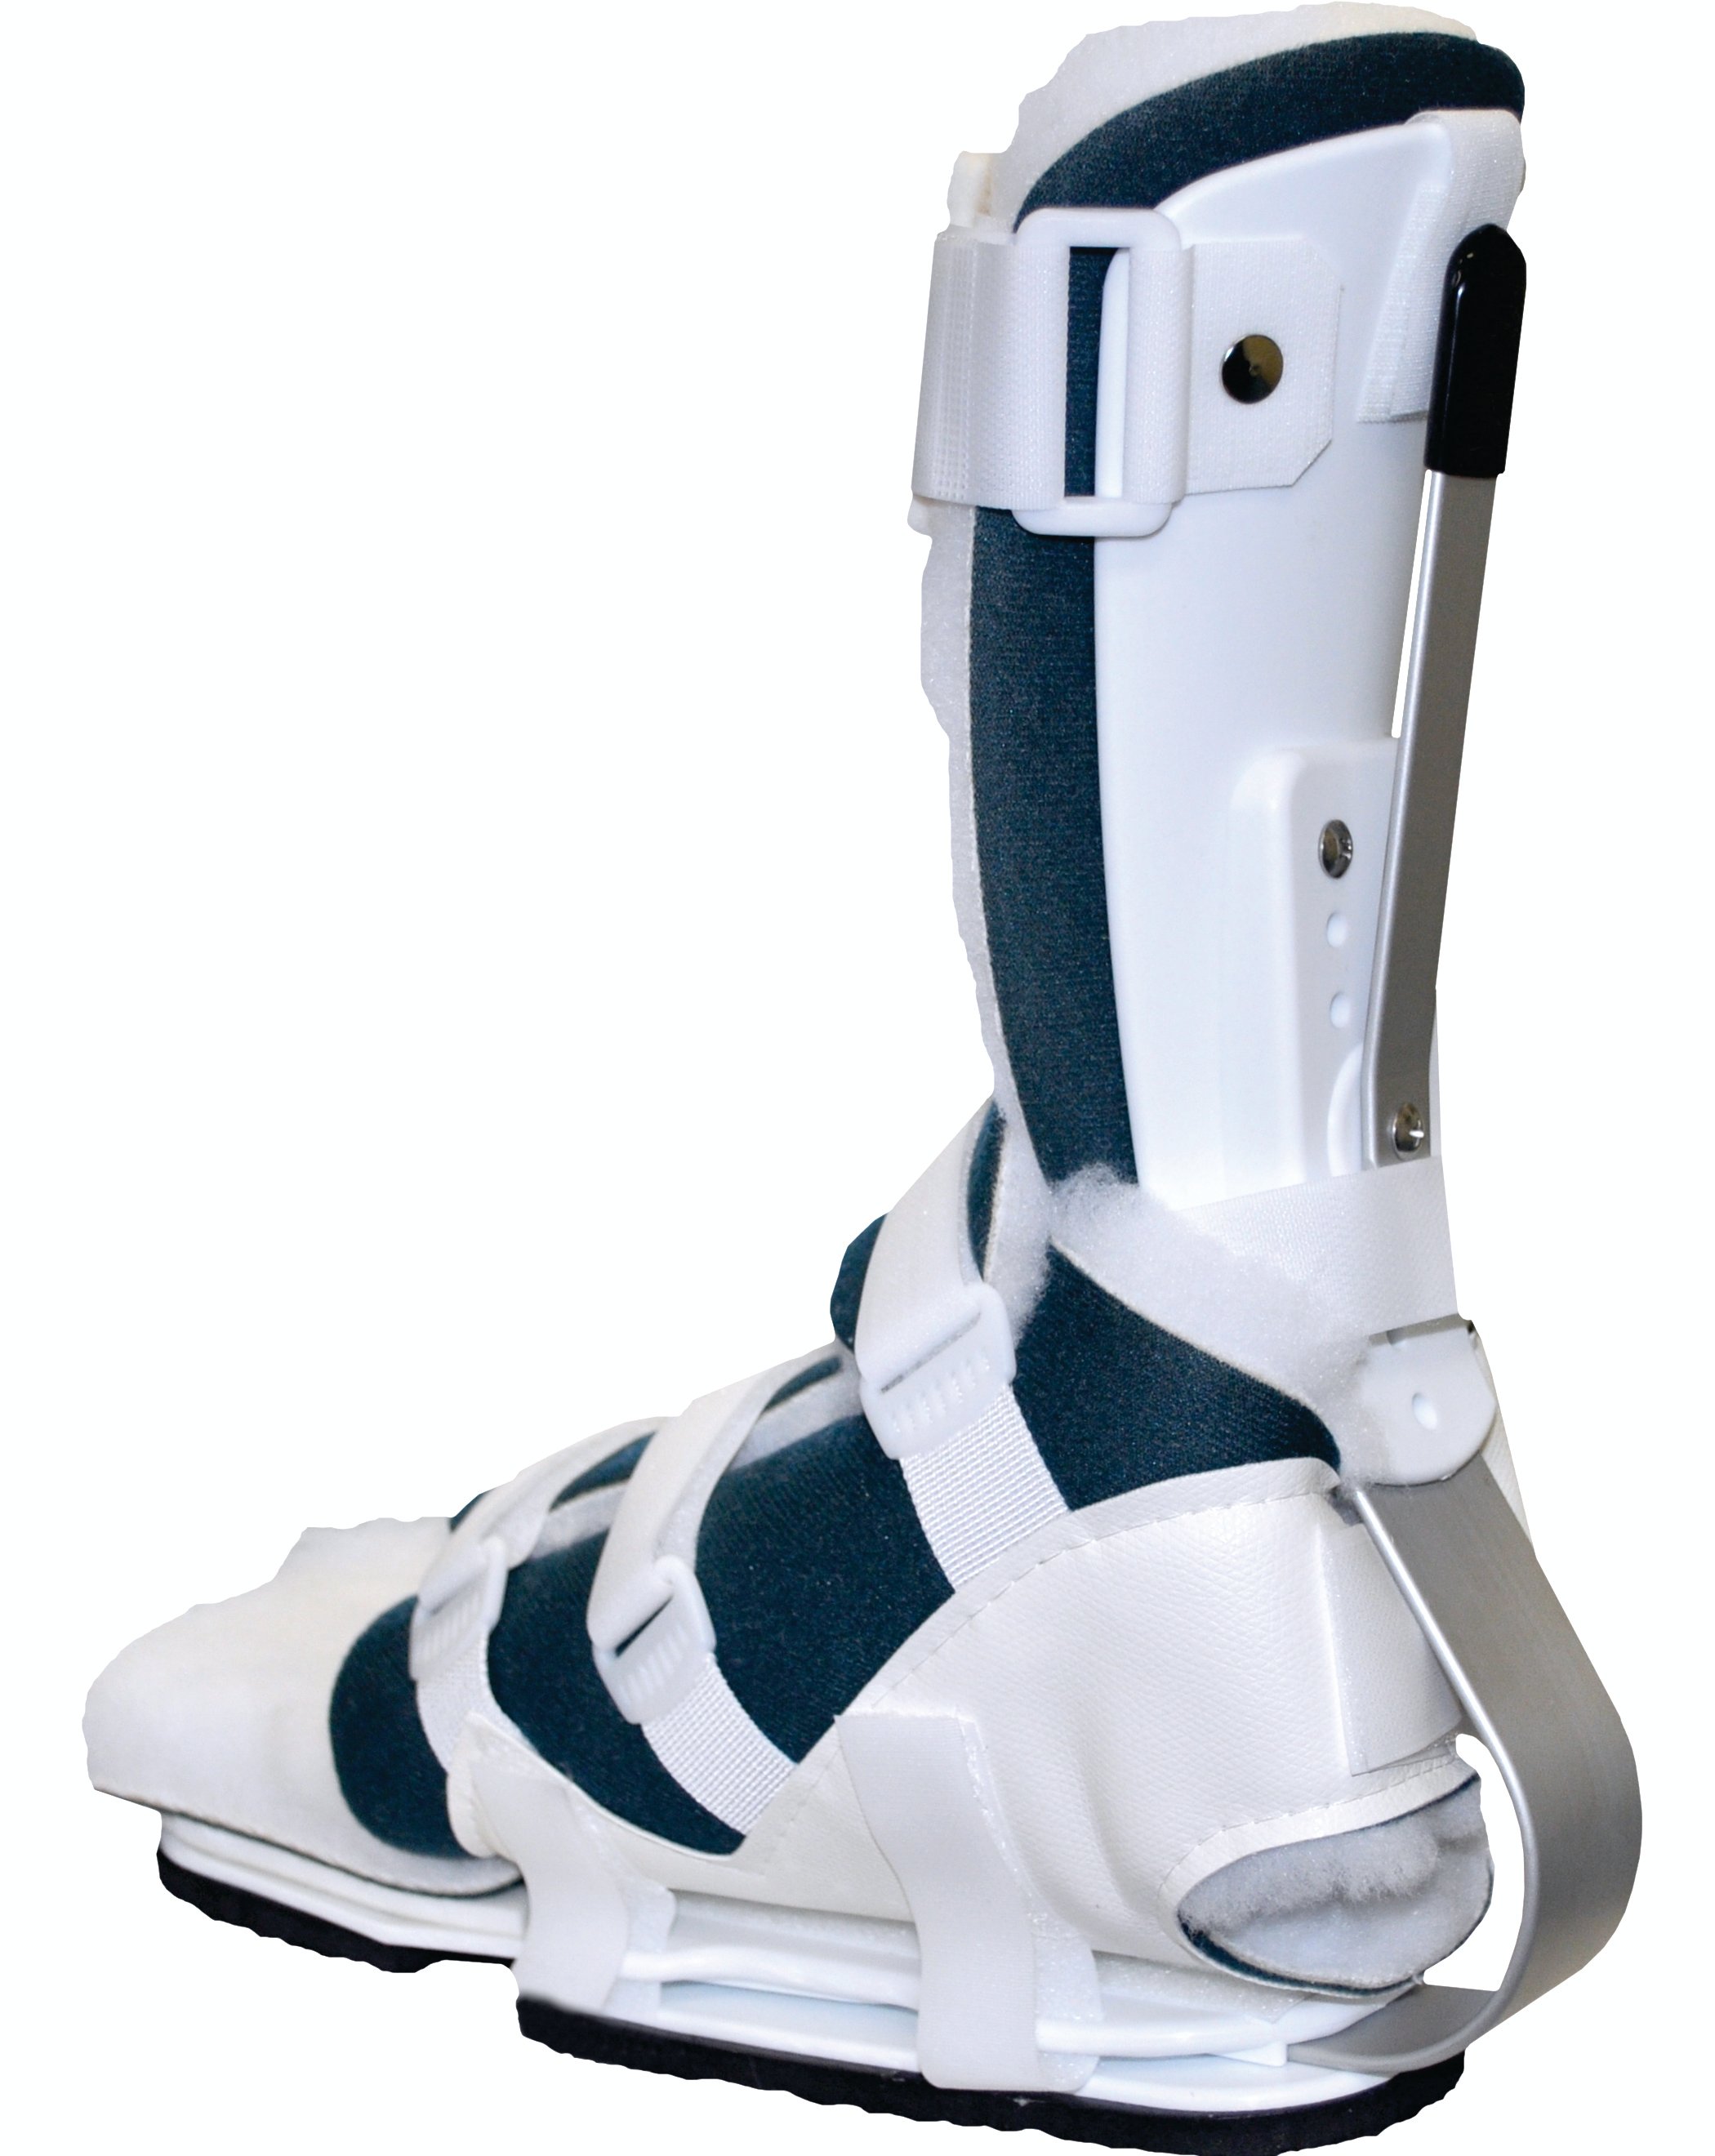 PRAFO® Ankle Foot Orthosis (AFO) | Anatomical Concepts, Inc.